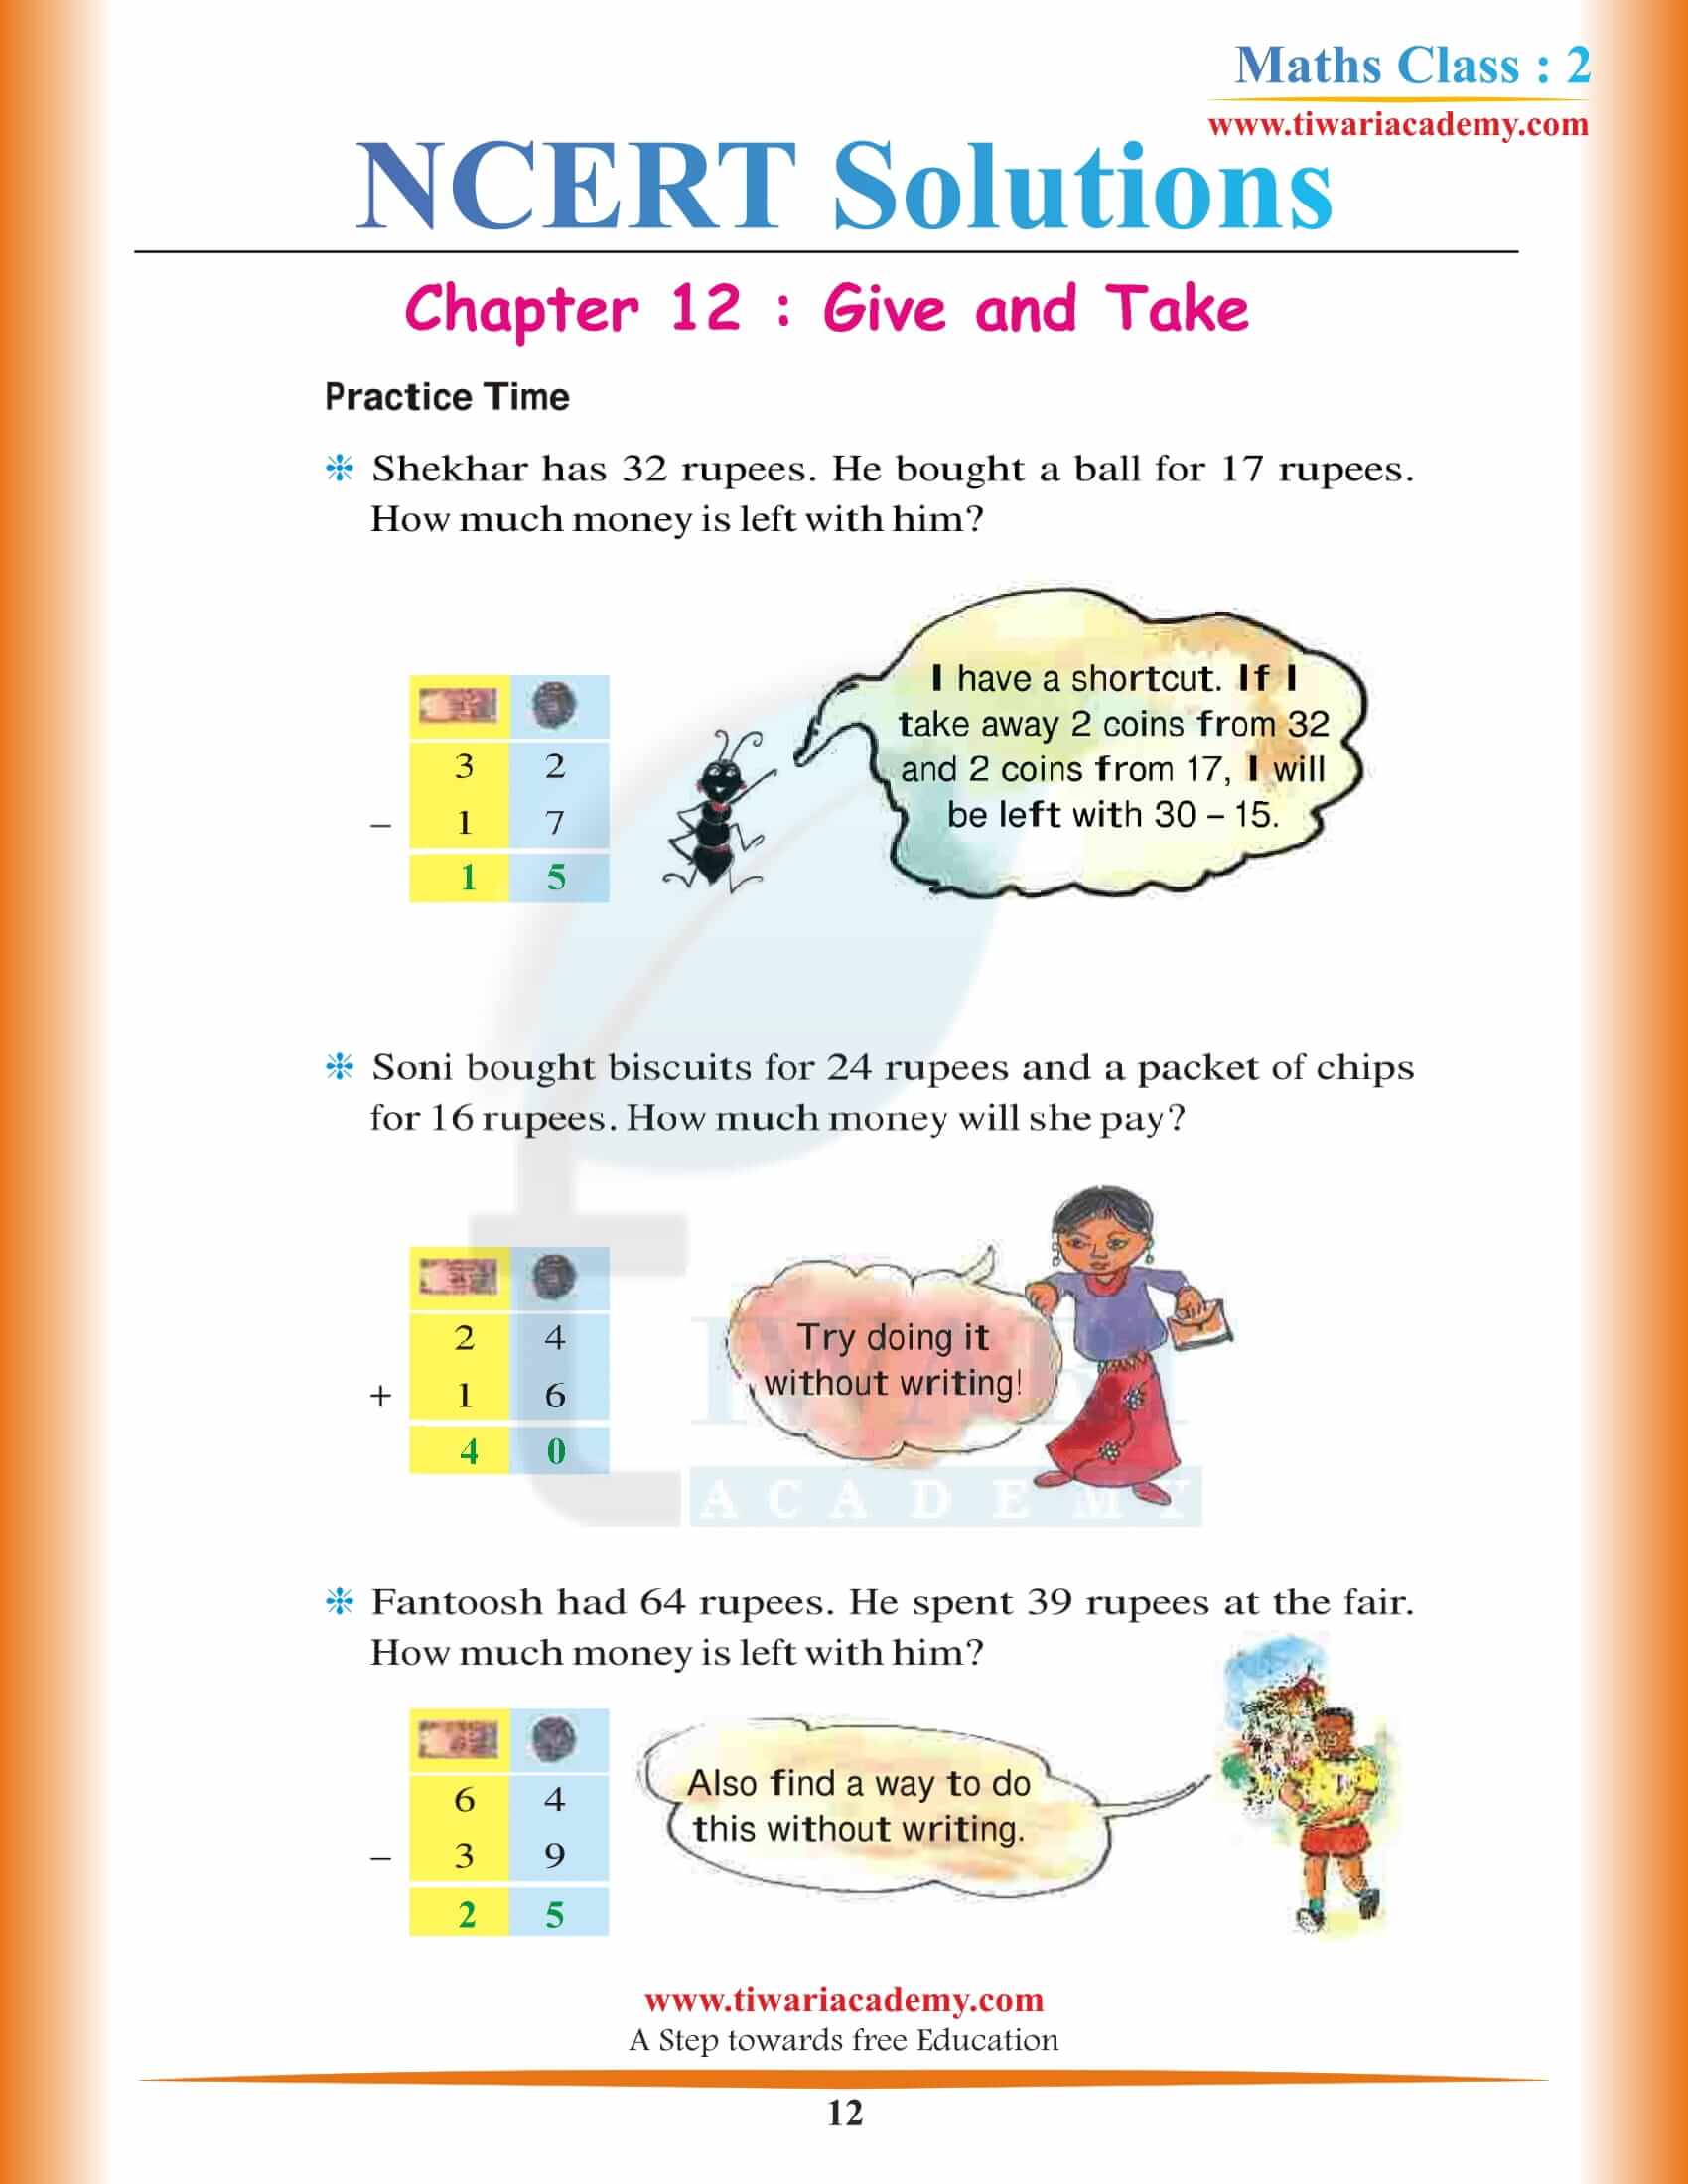 NCERT Solutions for Class 2 Maths Chapter 12 all free guide